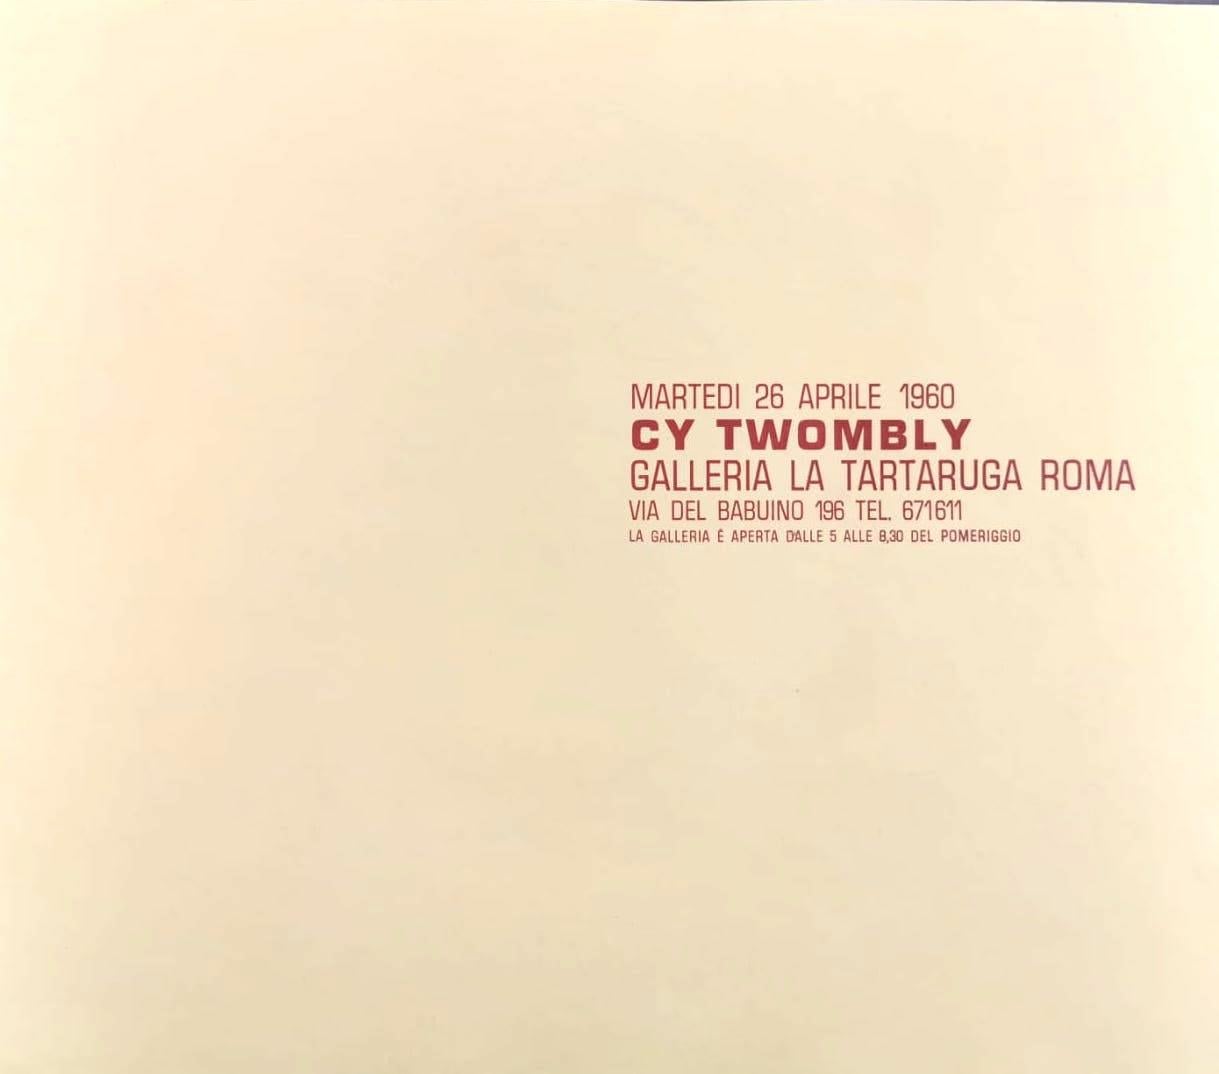 Ultra rare and precious exhibition leaflet of Cy Twombly's Exhibition at Galleria La Tartaruga, Rome, 1960. Lithograph on ivory colored cardboard.

Invitation of the American master exhibition at the La Tartaruga Gallery in Rome from the 26th April